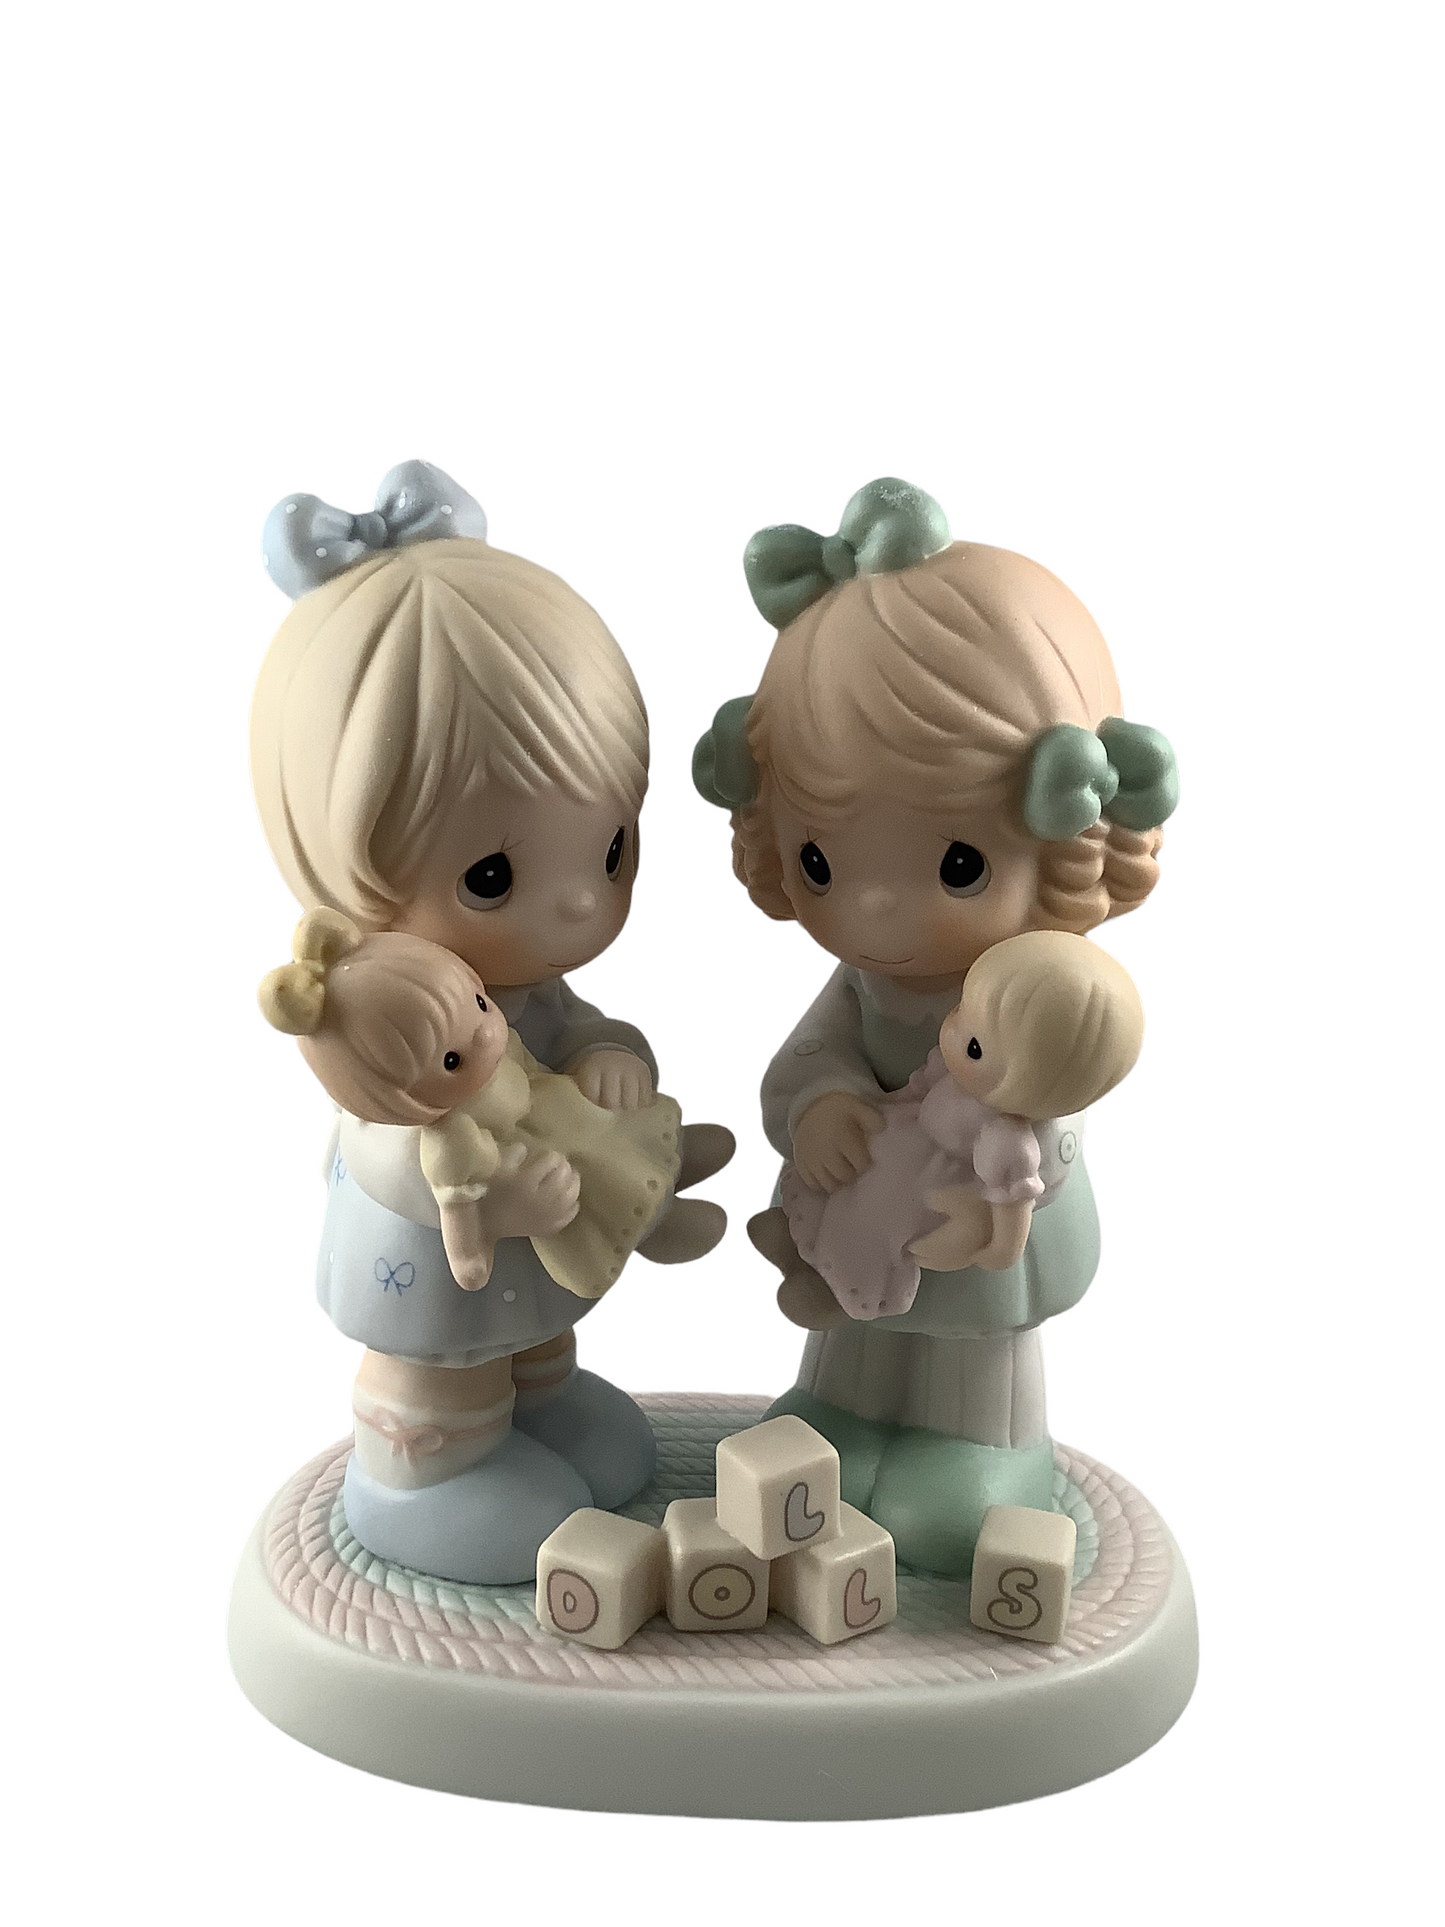 You're The Best Friend On The Block - Precious Moment Figurine